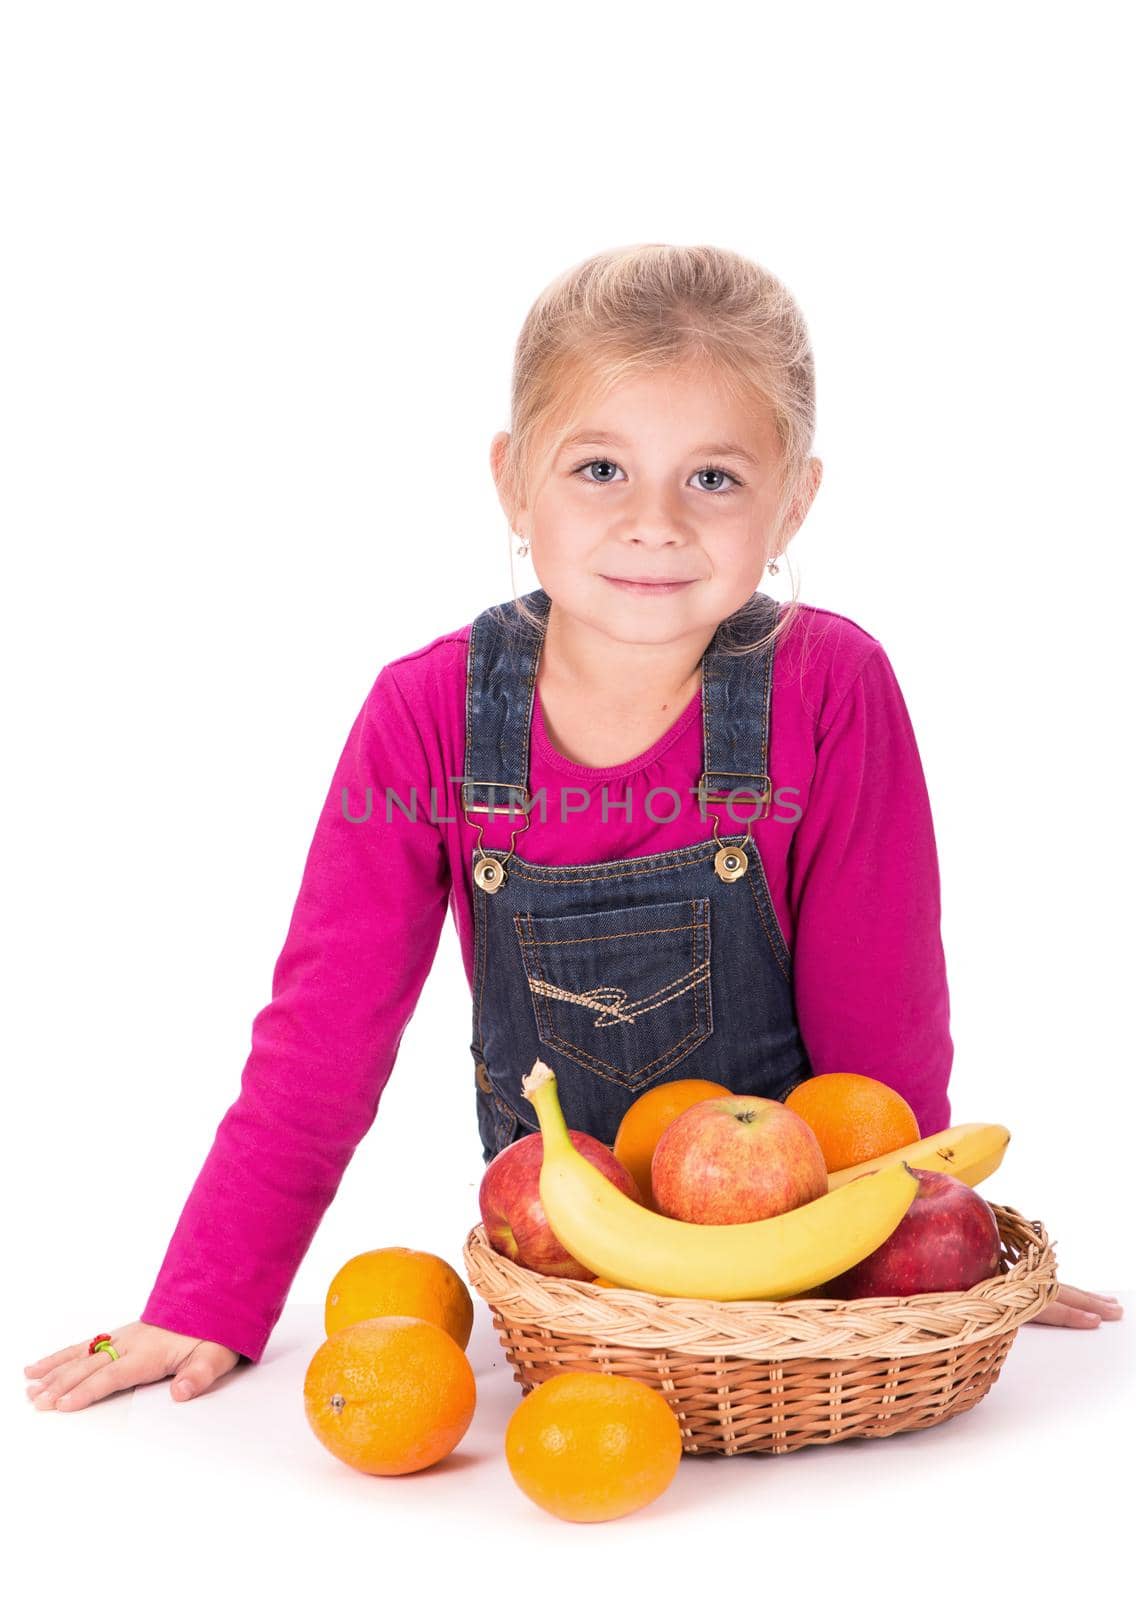 Close-up portrait of a little girl holding fruits - apples and pear.